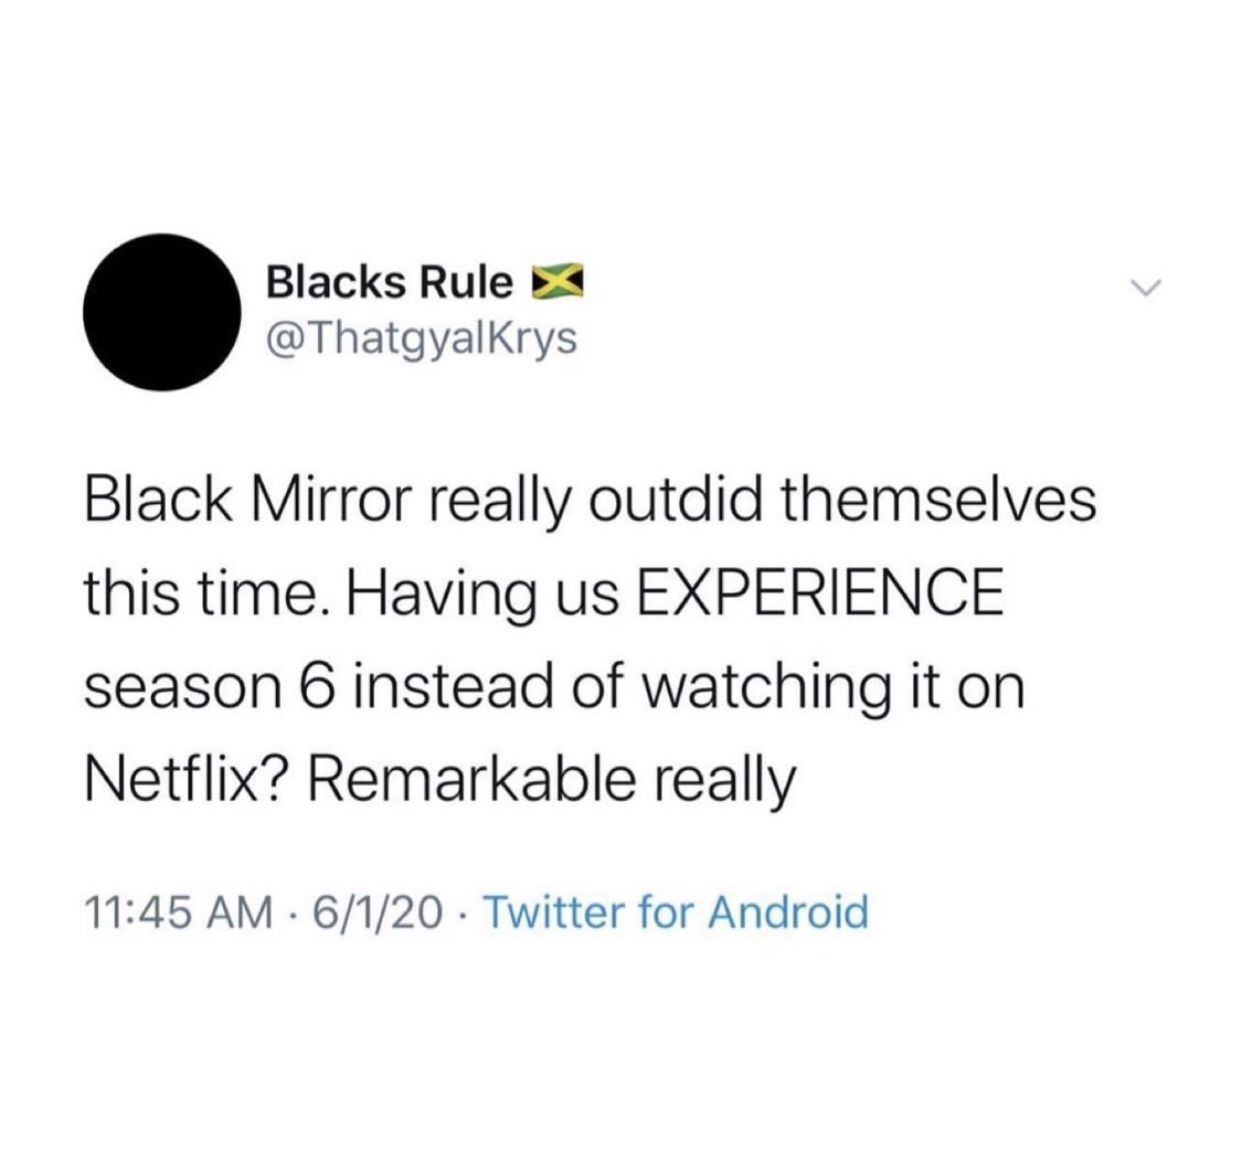 harvard community college meme - Blacks Rule Black Mirror really outdid themselves this time. Having us Experience season 6 instead of watching it on Netflix? Remarkable really 6120 Twitter for Android